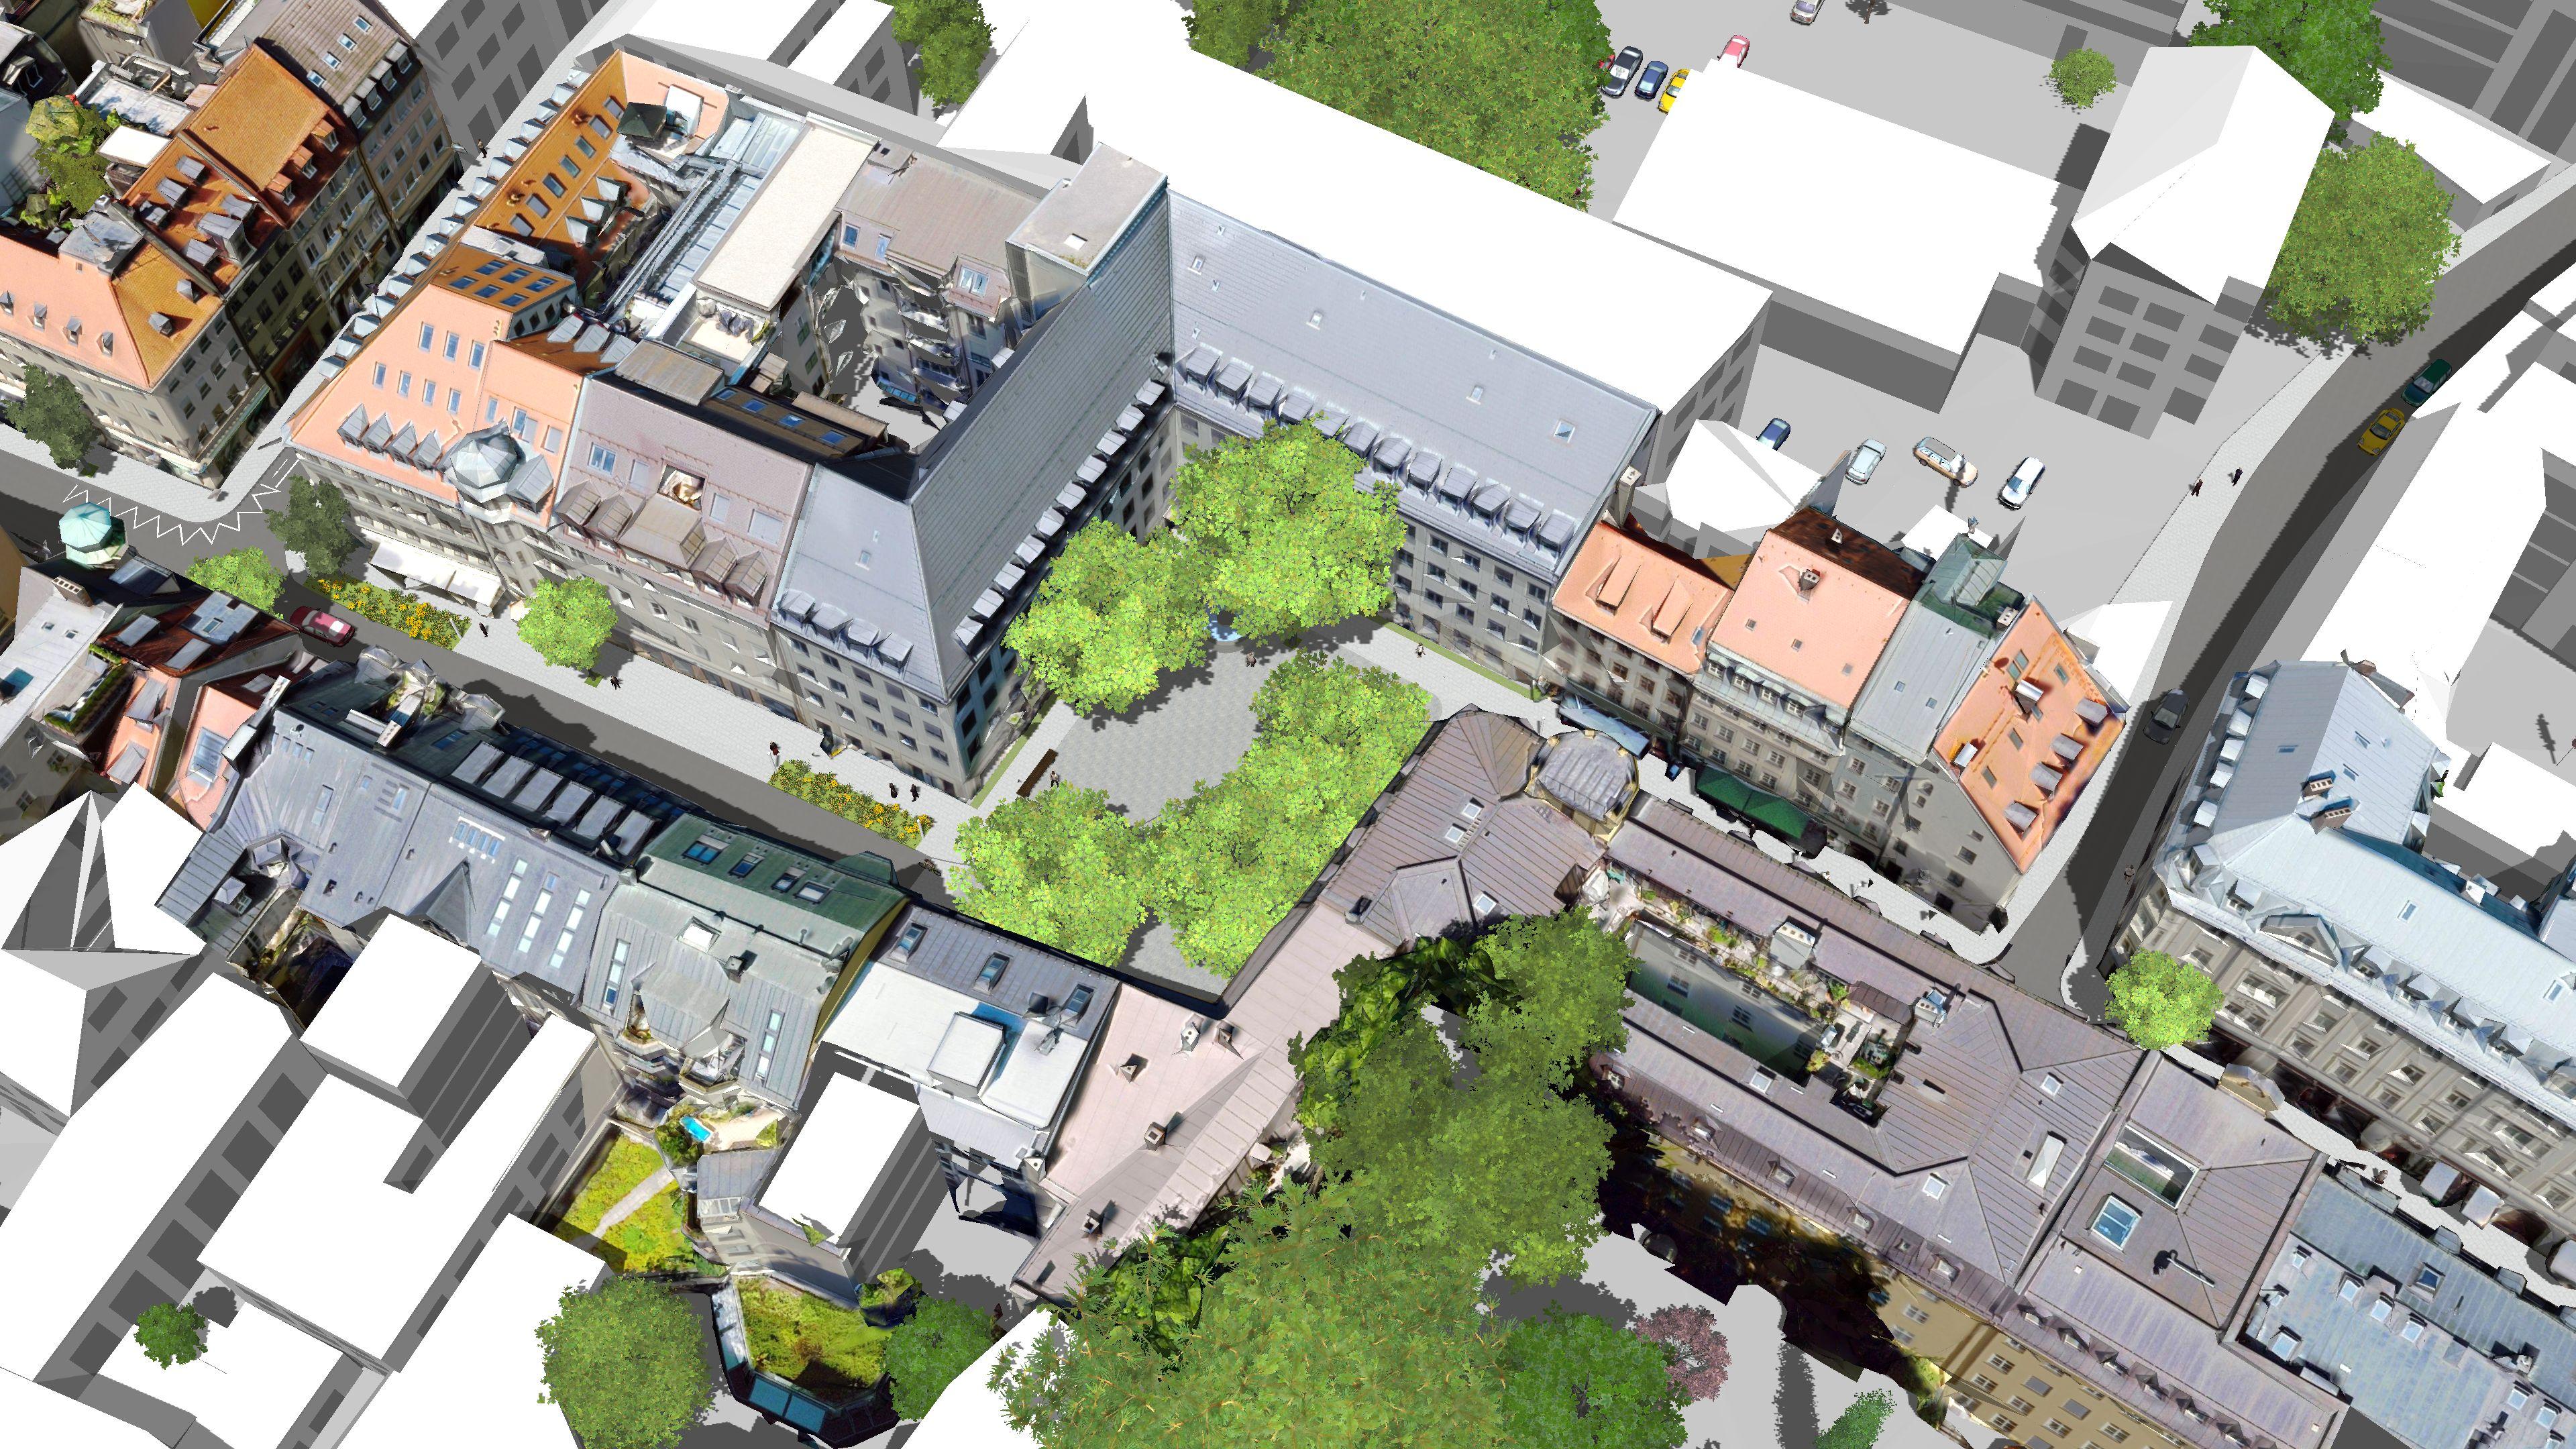 3D planning visualization with the Digital Twin Munich